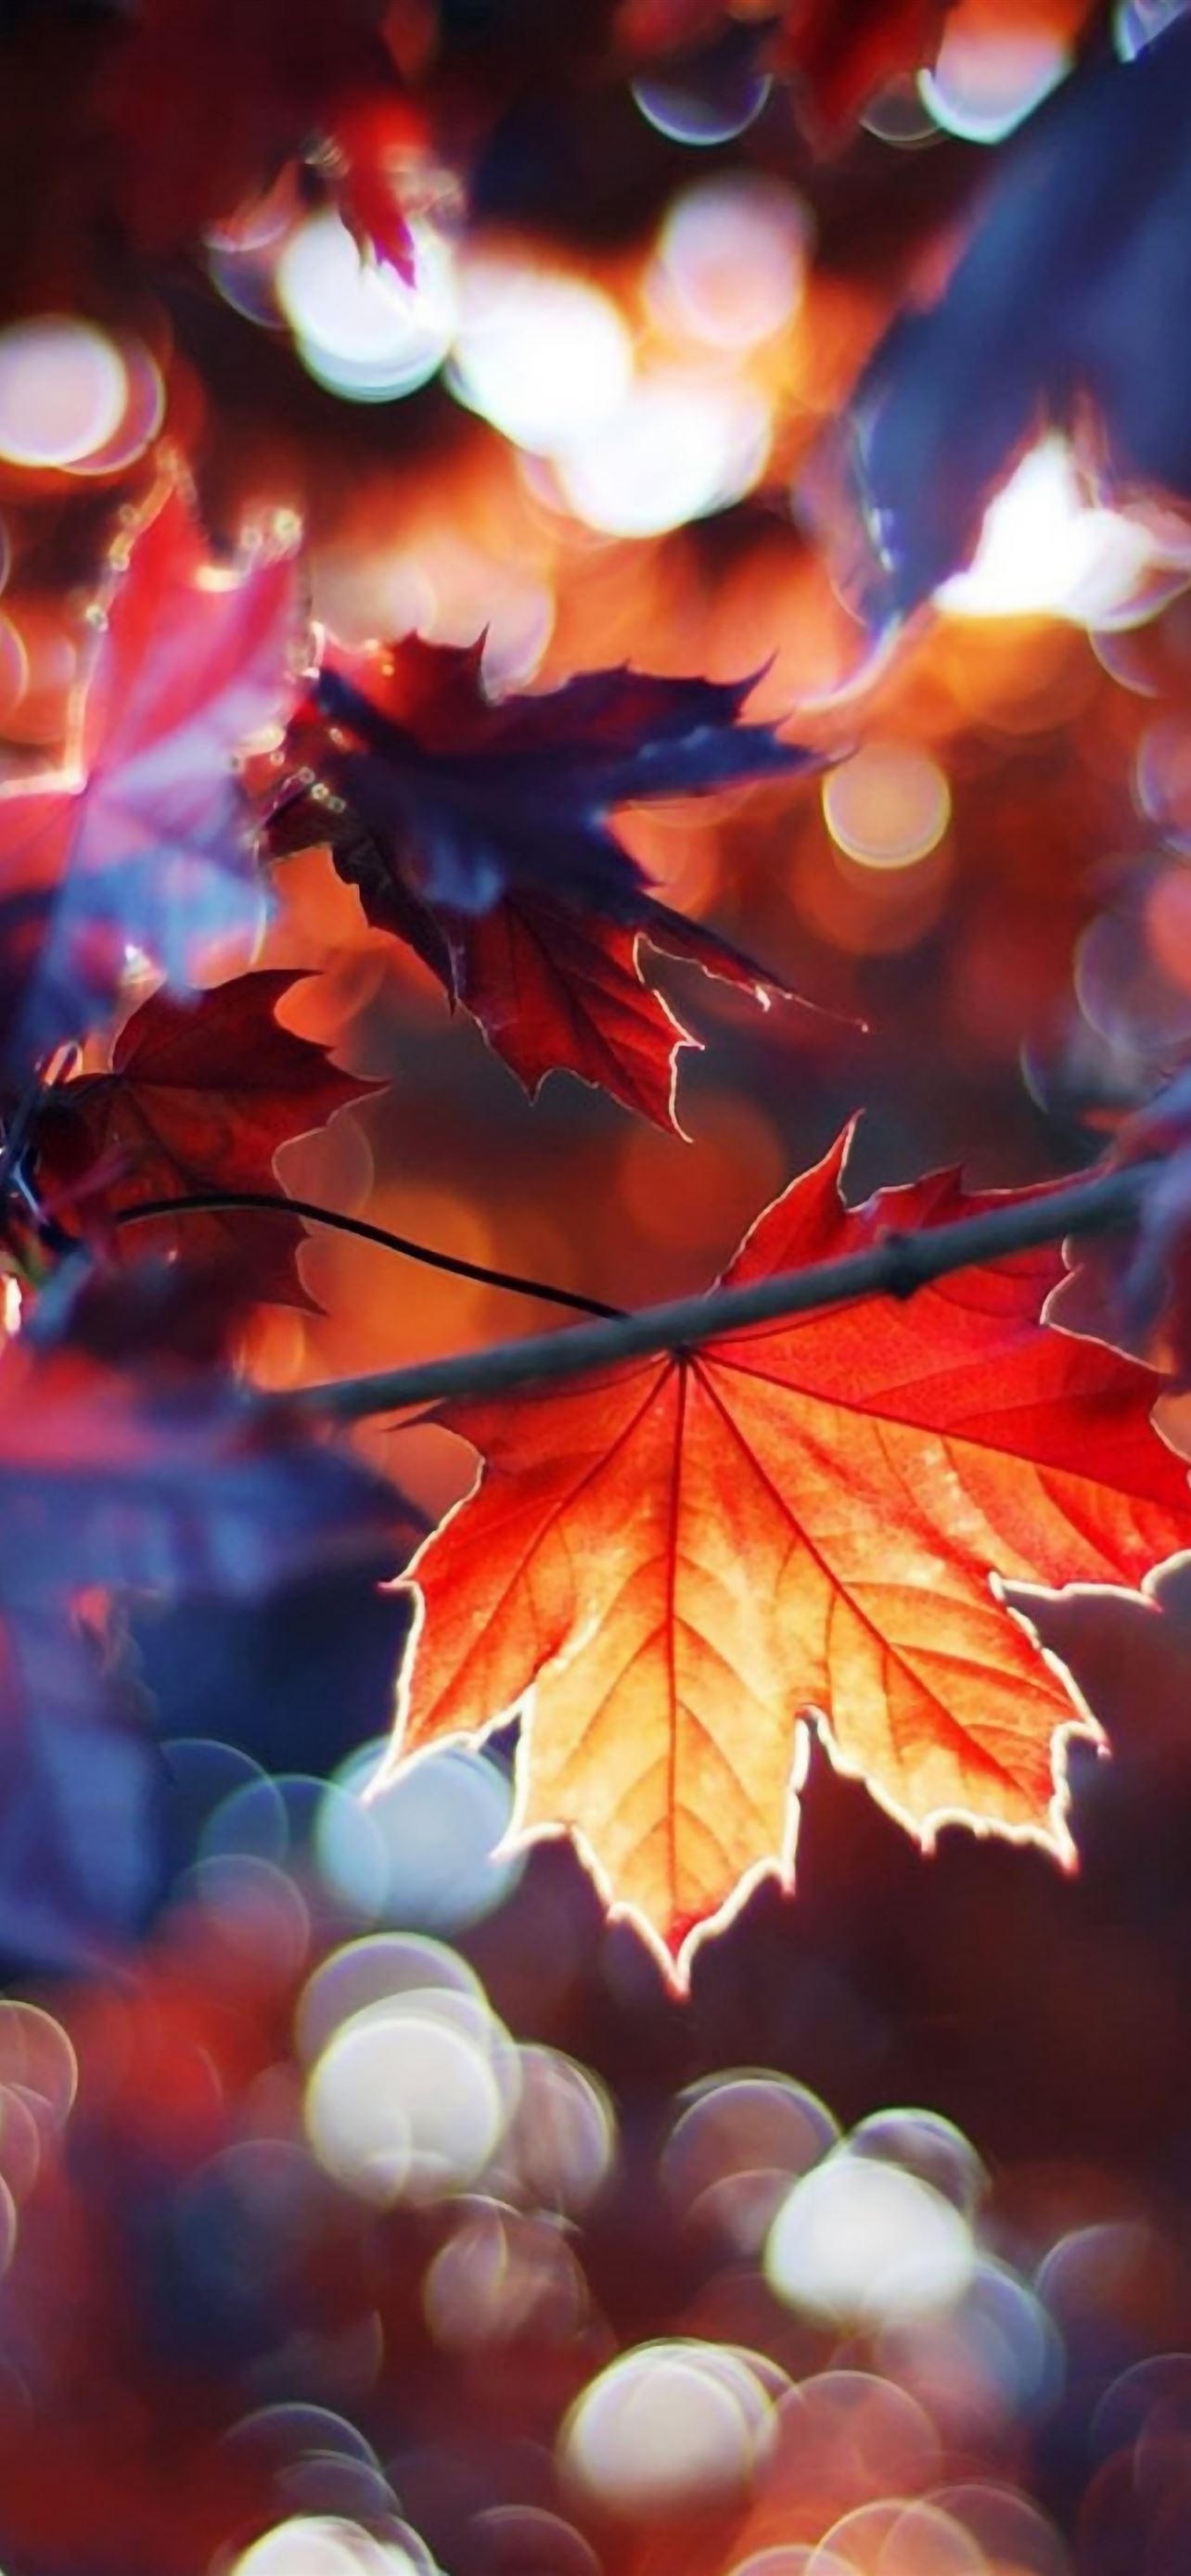 Autumn Leaves iPhone Wallpapers Free Download